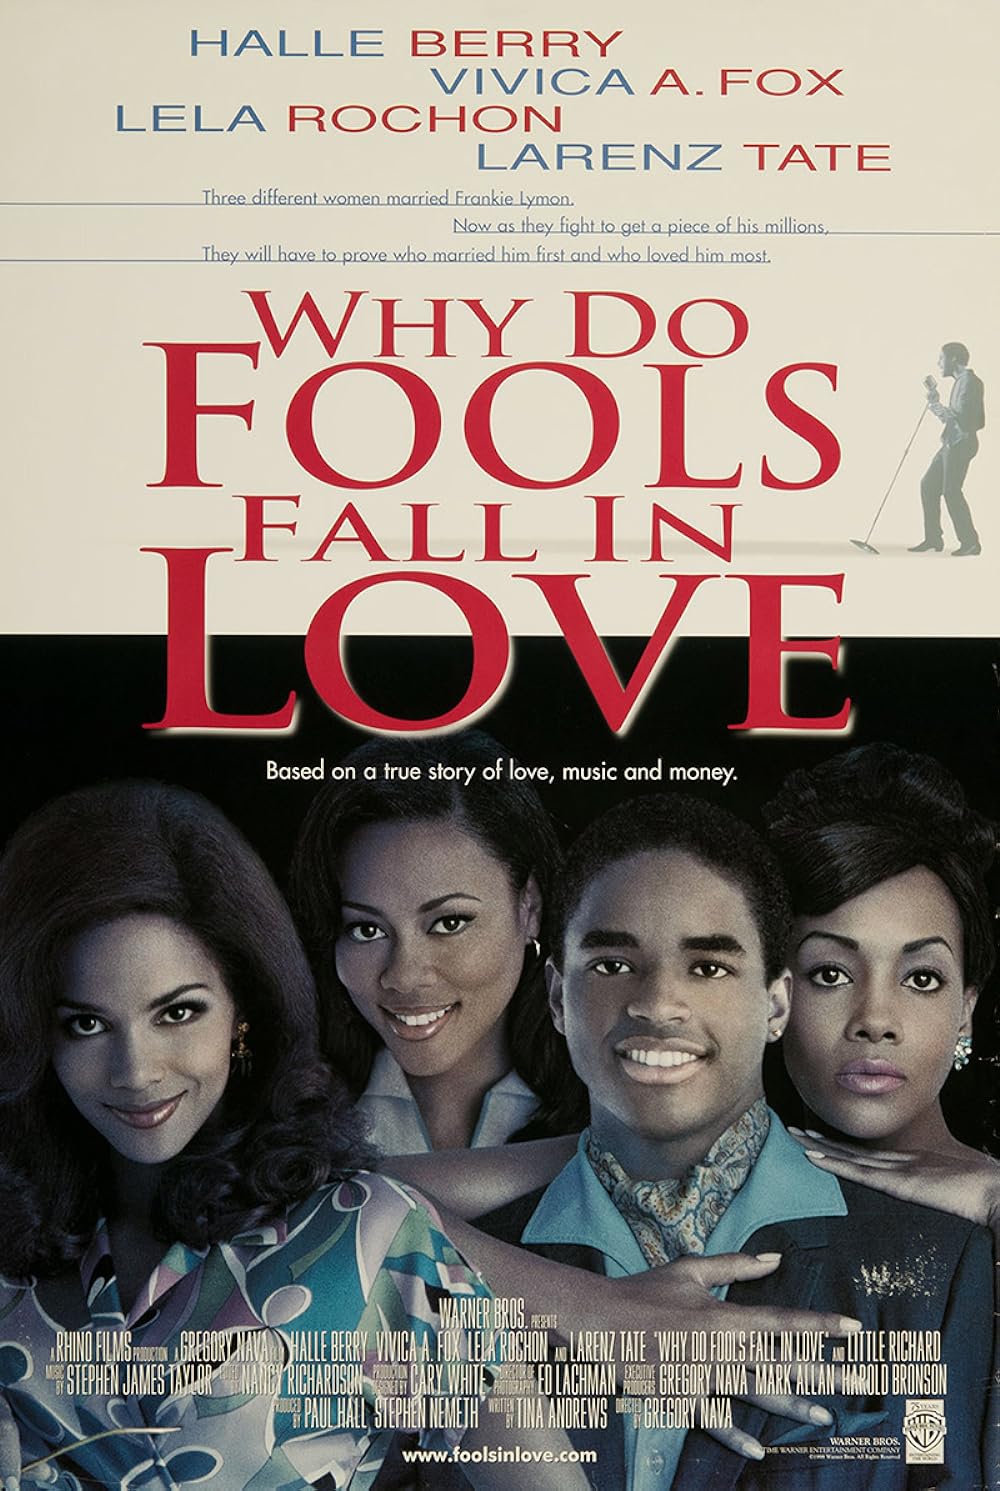 FULL MOVIE: Why Do Fools Fall In Love (1998)